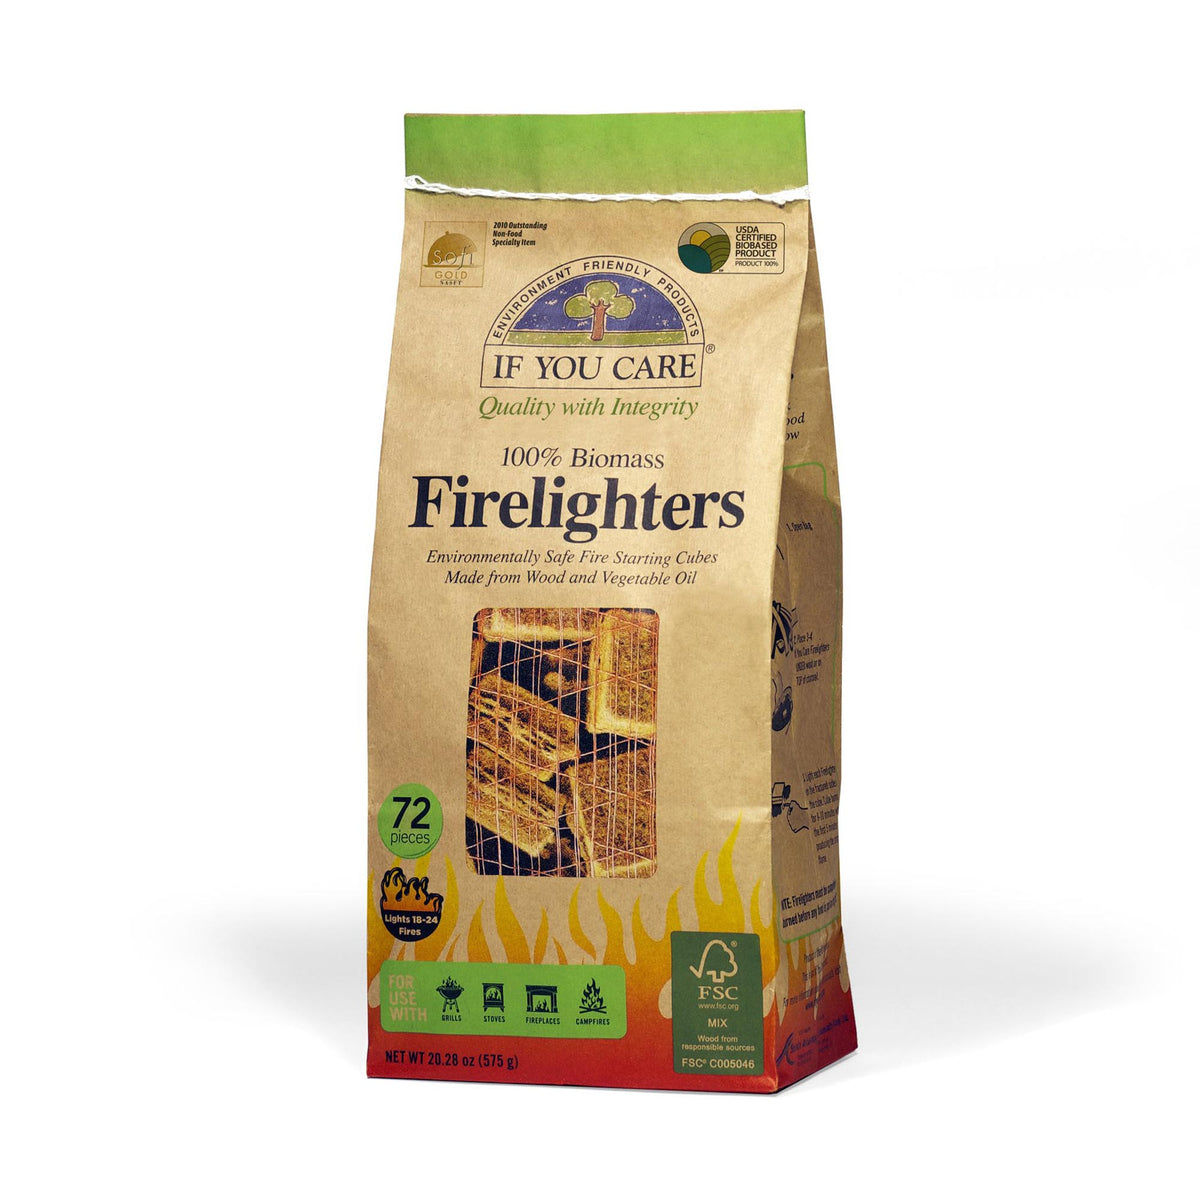 firelighters in package, 72 pieces, Net WT 28.28 oz